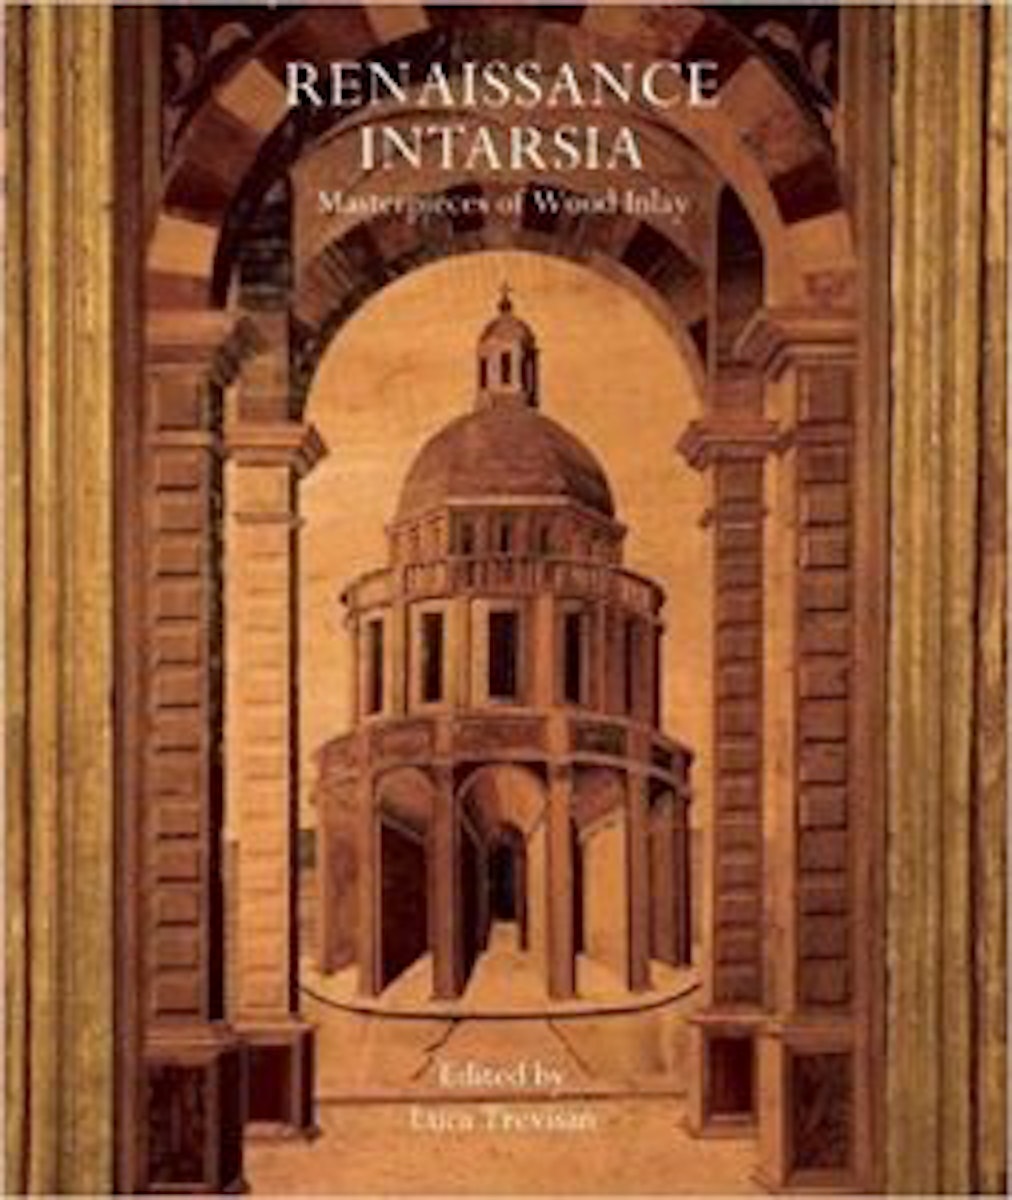 Renaissance Intarsia: Masterpieces of Wood Inlay cover